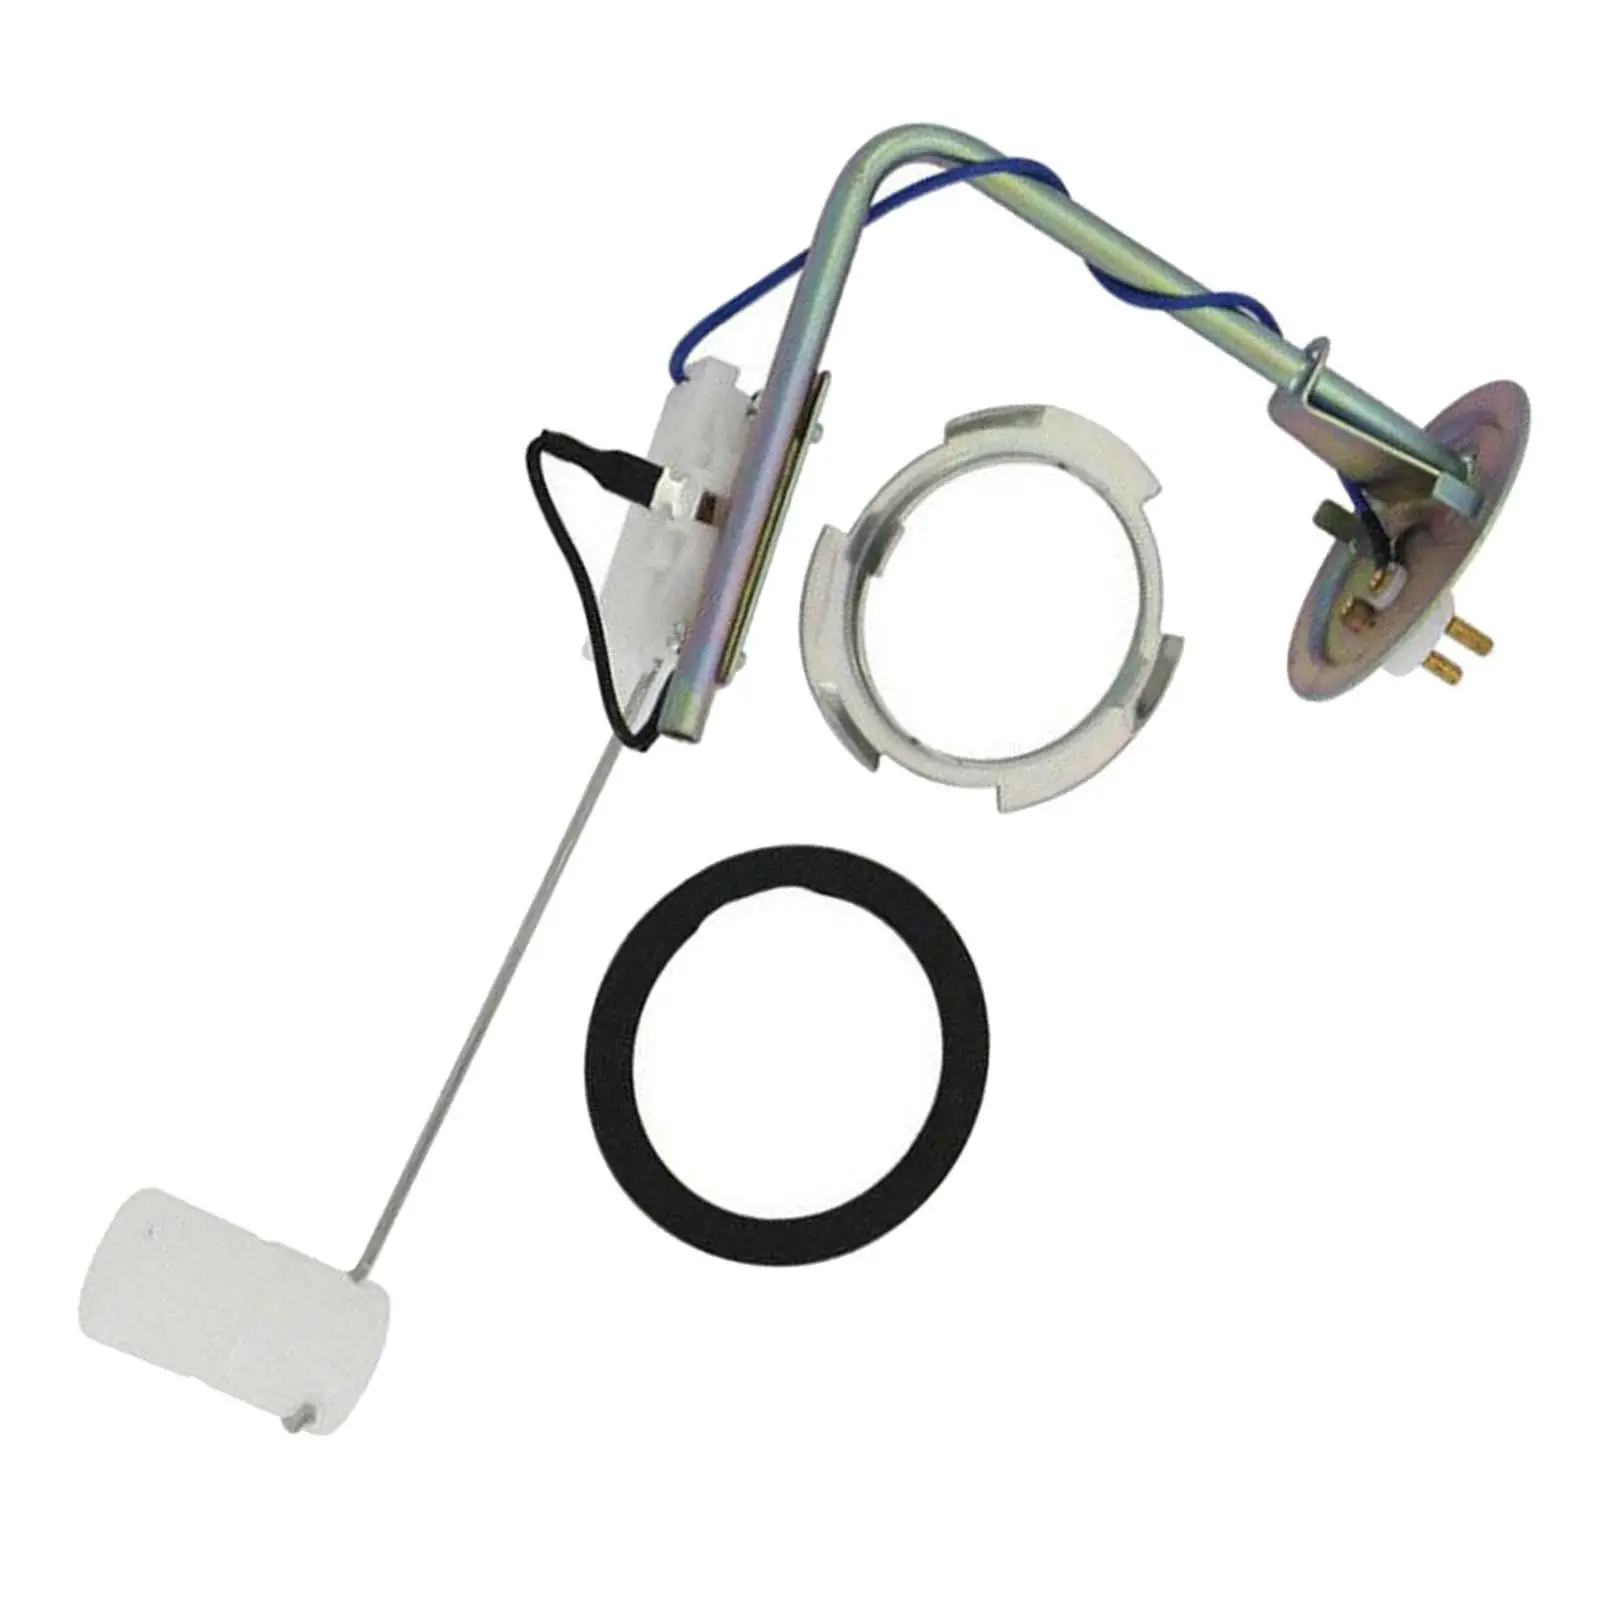 Fuel Pump Sender Easy to Install Accessories Replaces Professional Durable E0LY-9275-b 539GE for Lincoln Mercury 1980-1989